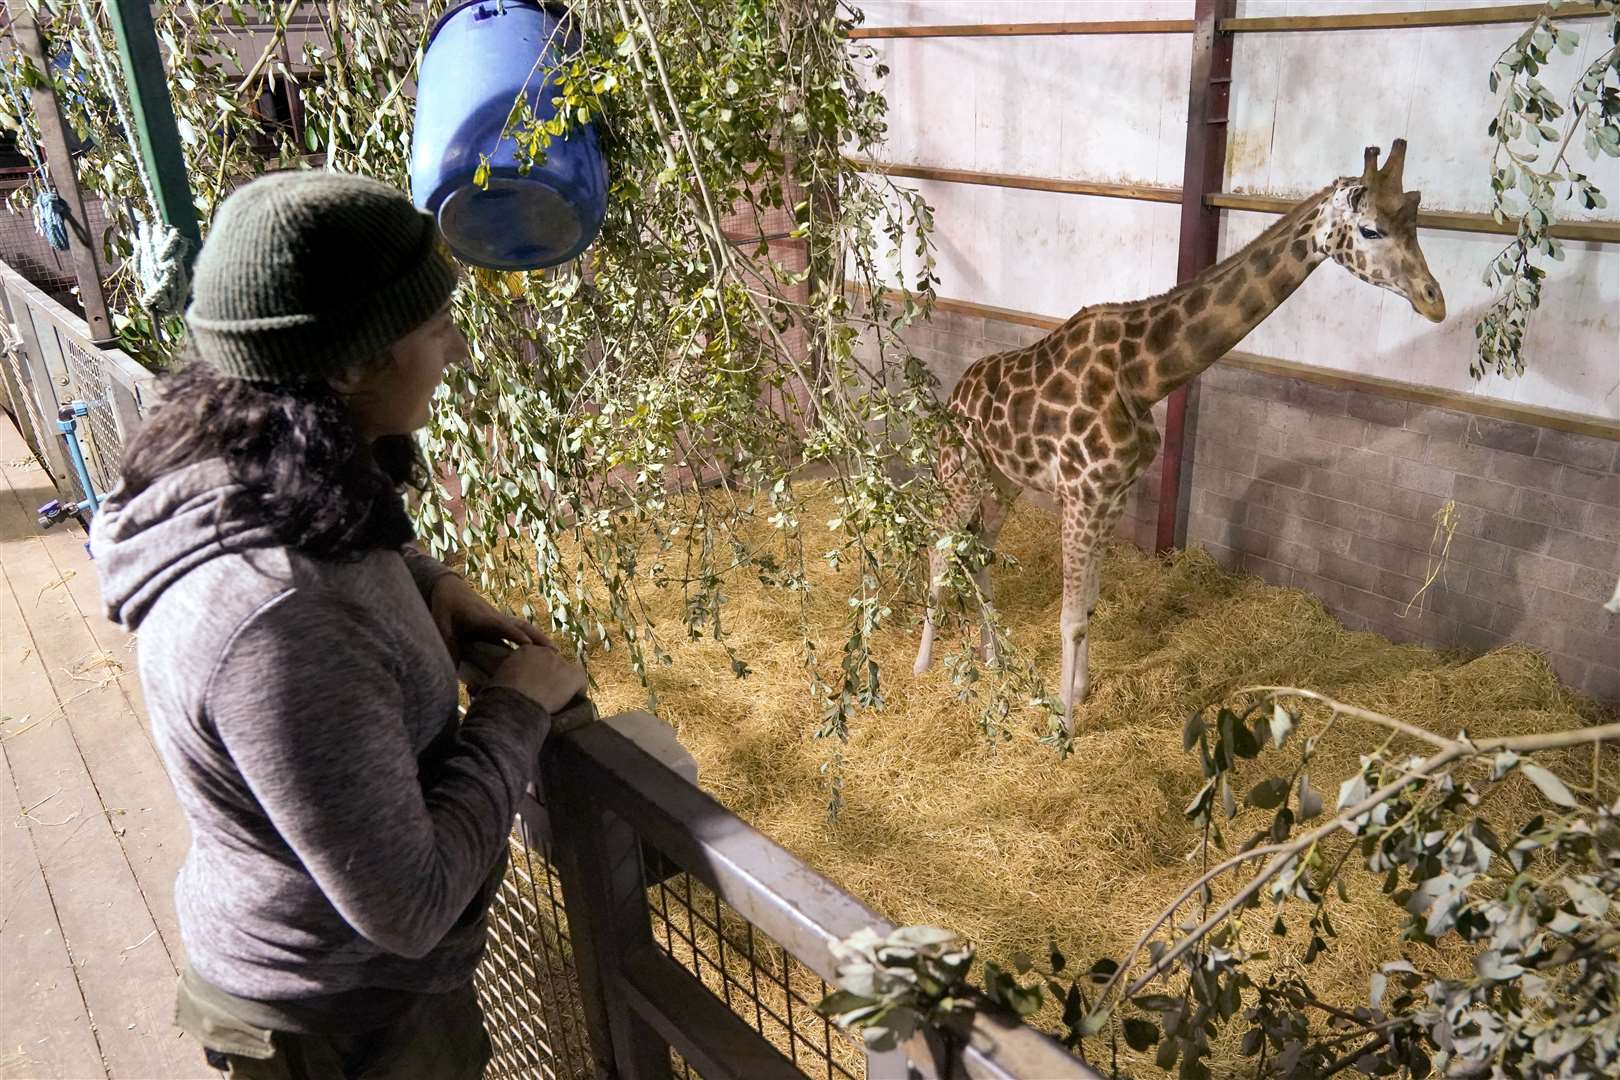 The park estimates there are only about 2,000 Rothschild’s giraffes left in the wild (Andrew Milligan/PA)